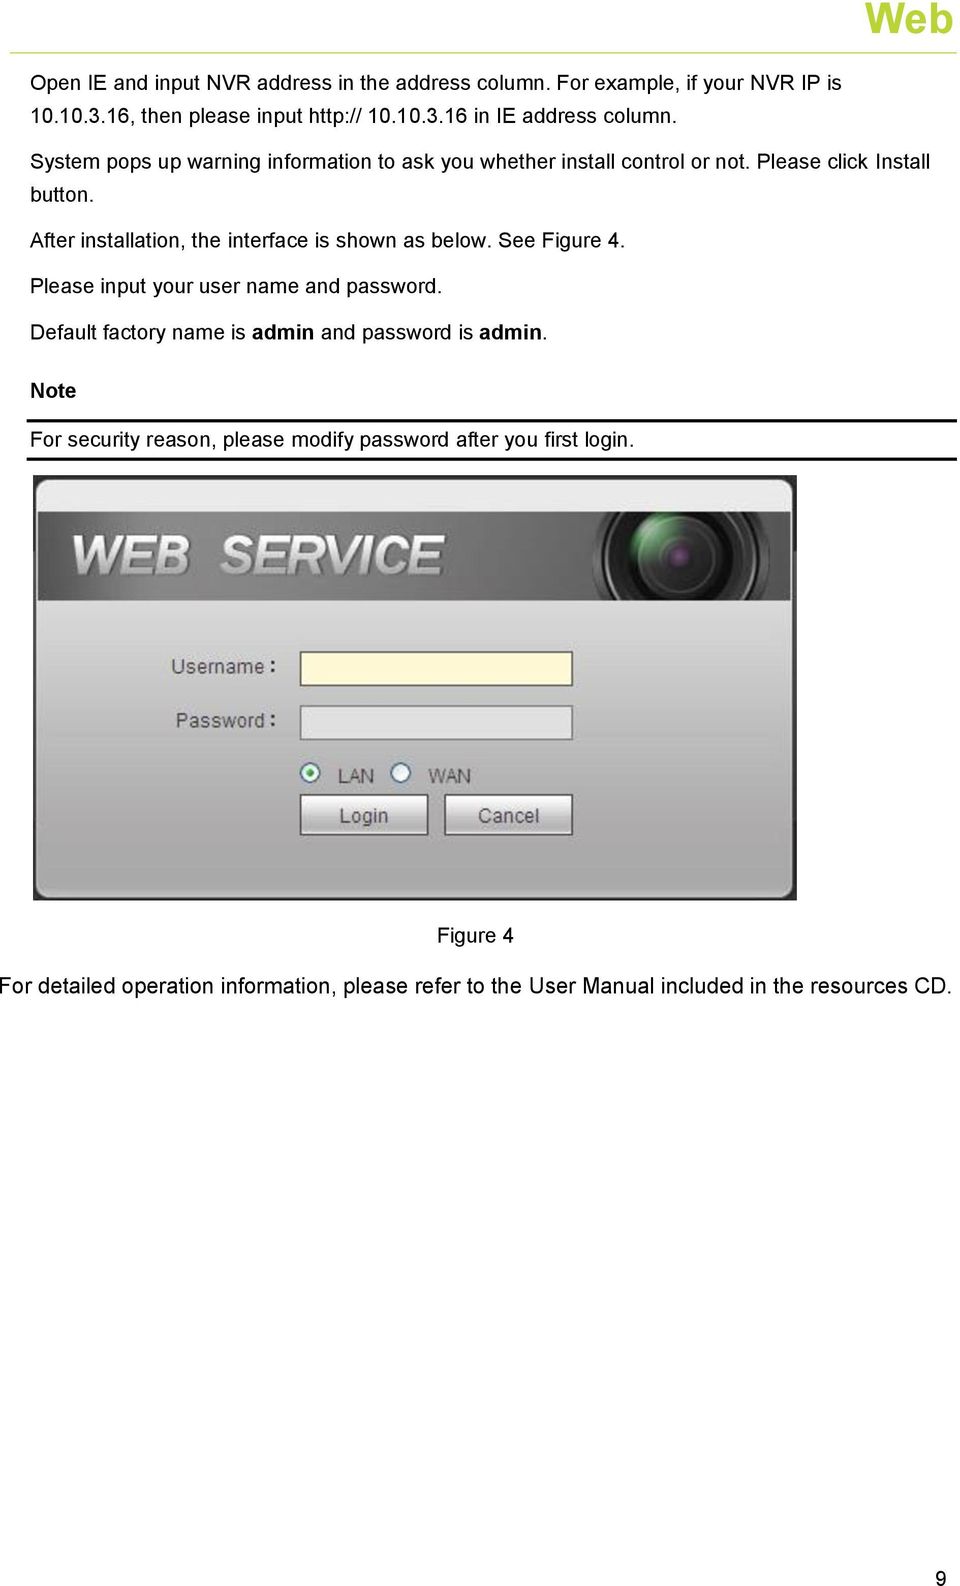 After installation, the interface is shown as below. See Figure 4. Please input your user name and password.